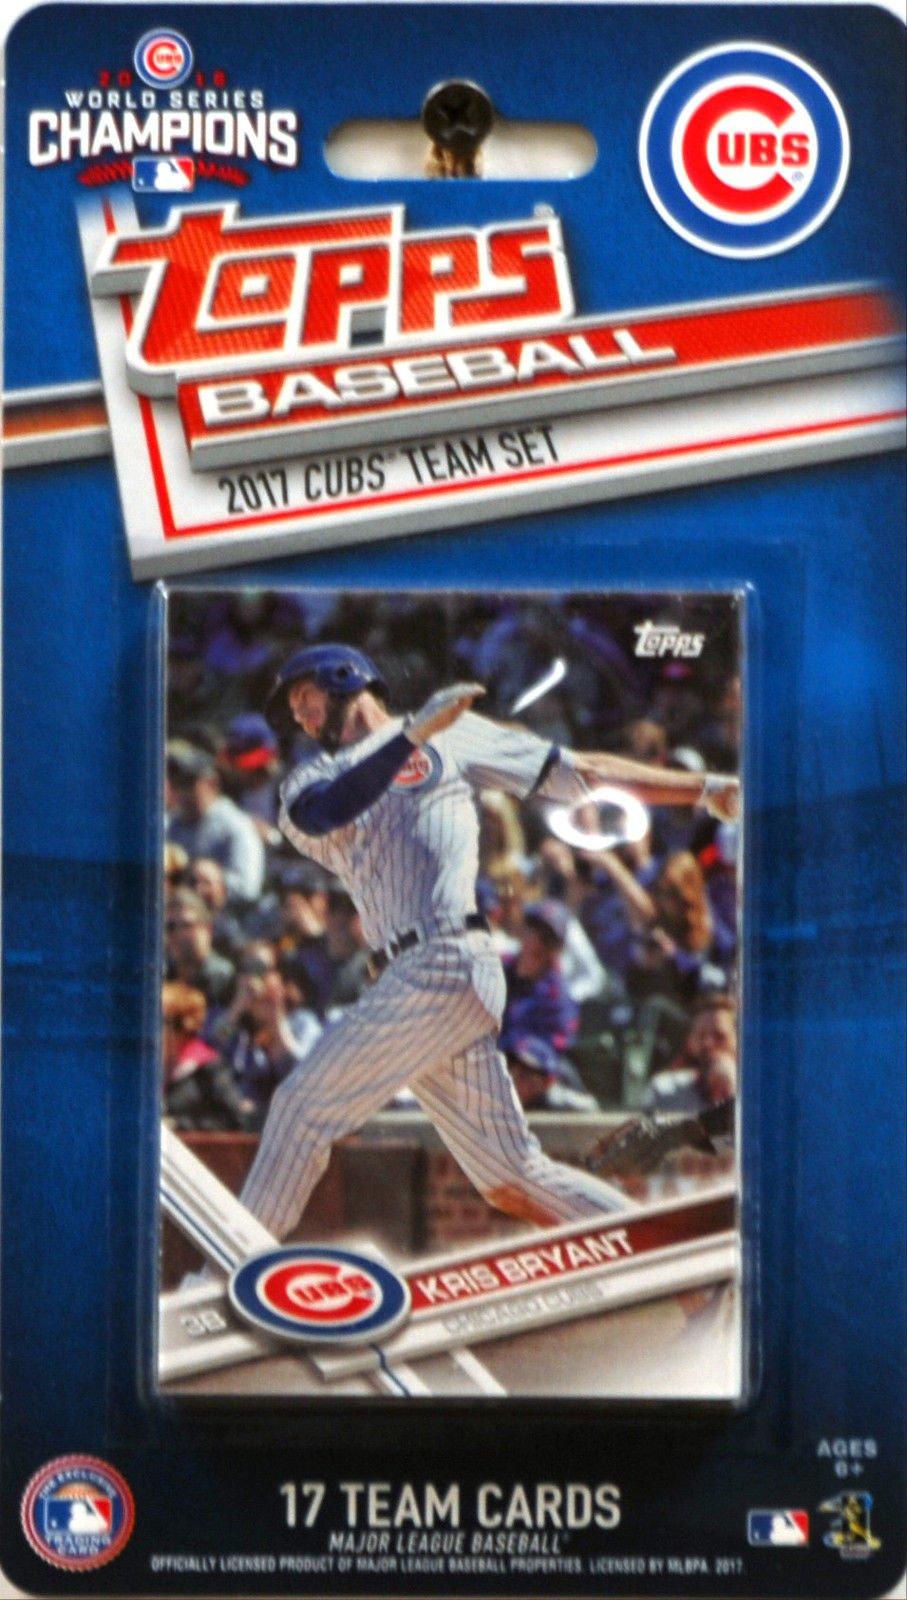 2020 Topps Baseball Chicago Cubs Team Collection 17 Card Set